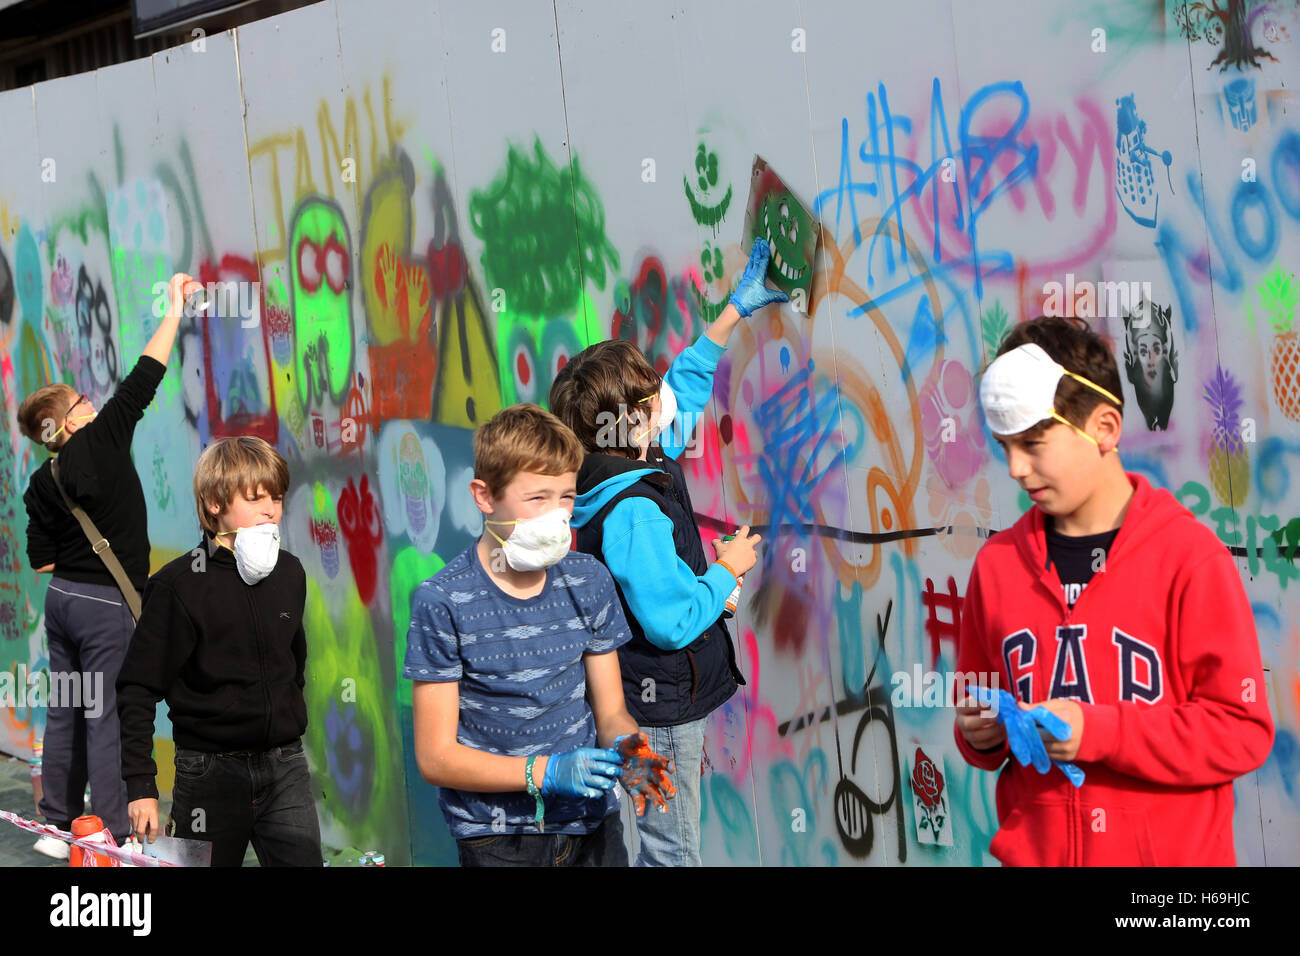 Small creative project where young people can graffiti on a boarded up building in the center of Bognor Regis, West Sussex, UK. Stock Photo